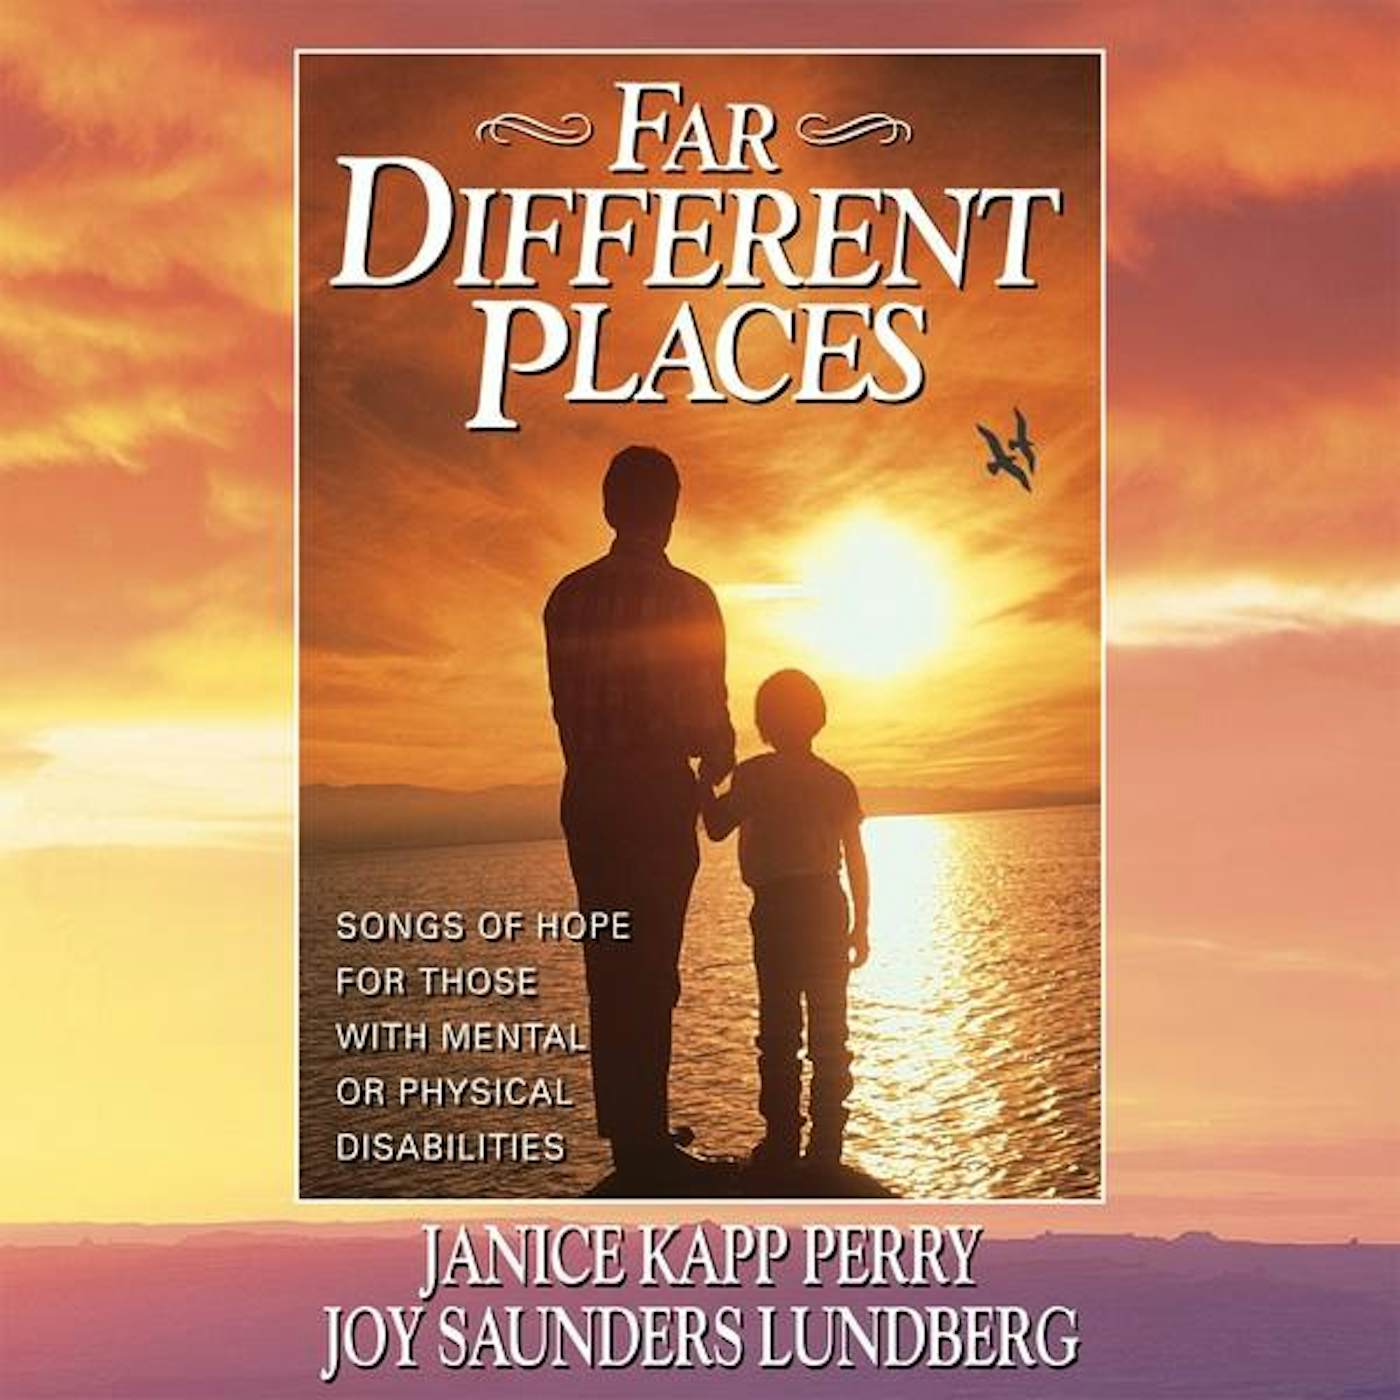 Janice Kapp Perry FAR DIFFERENT PLACES CD